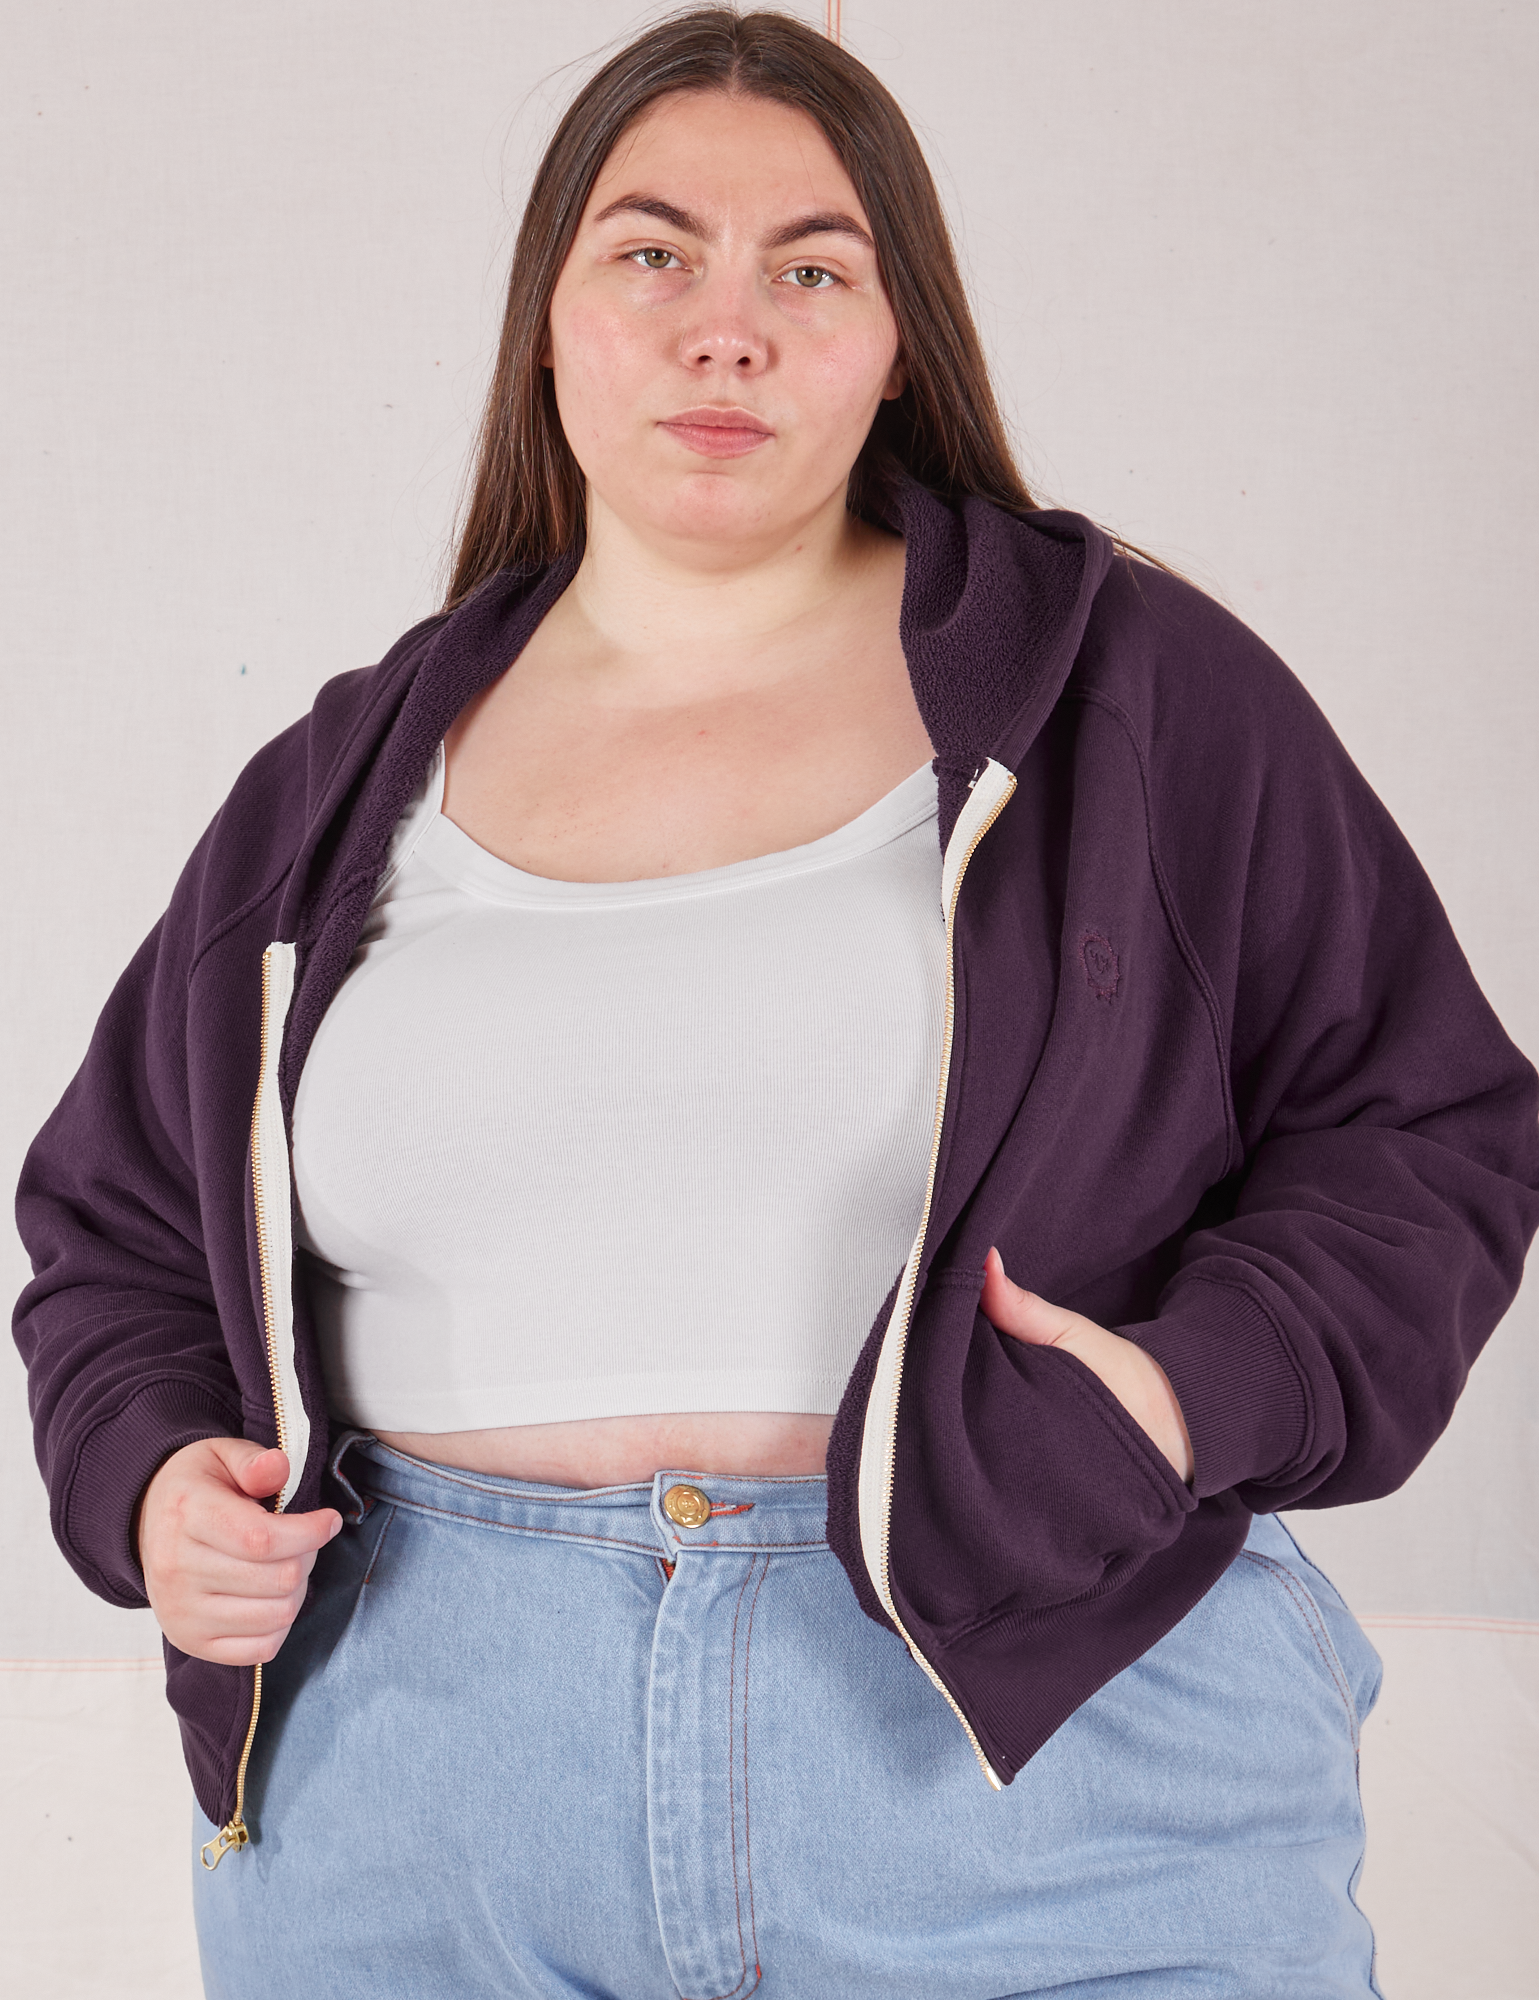 Marielena is 5&#39;8&quot; and wearing L Cropped Zip Hoodie in Nebula Purple paired with a vintage off-white Cropped Tank underneath